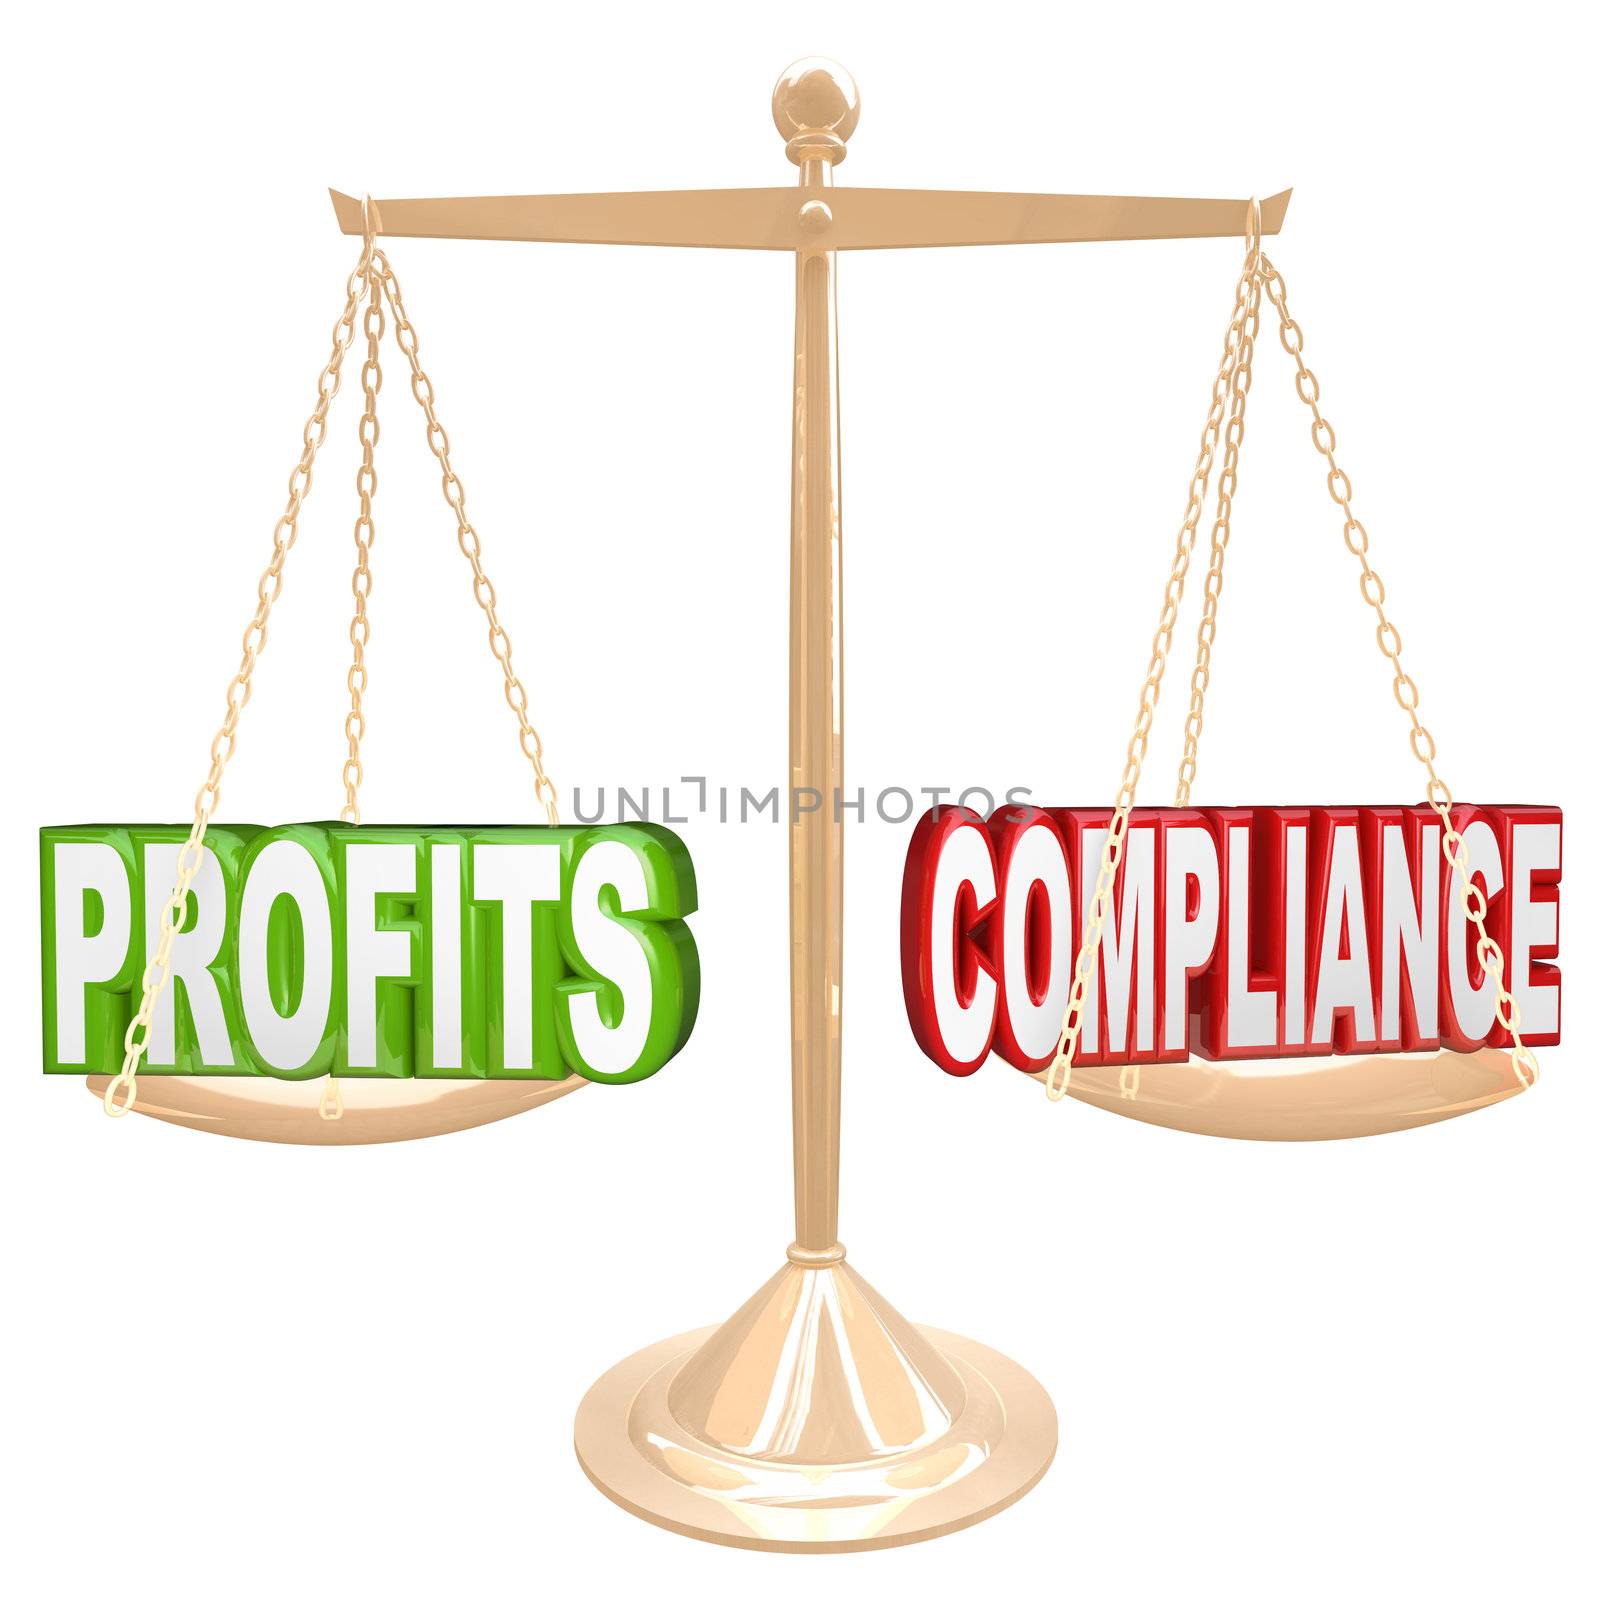 The words Profits and Compliance on a gold balance weighing the value of earning money and following rules and regulations governing commerce and sales